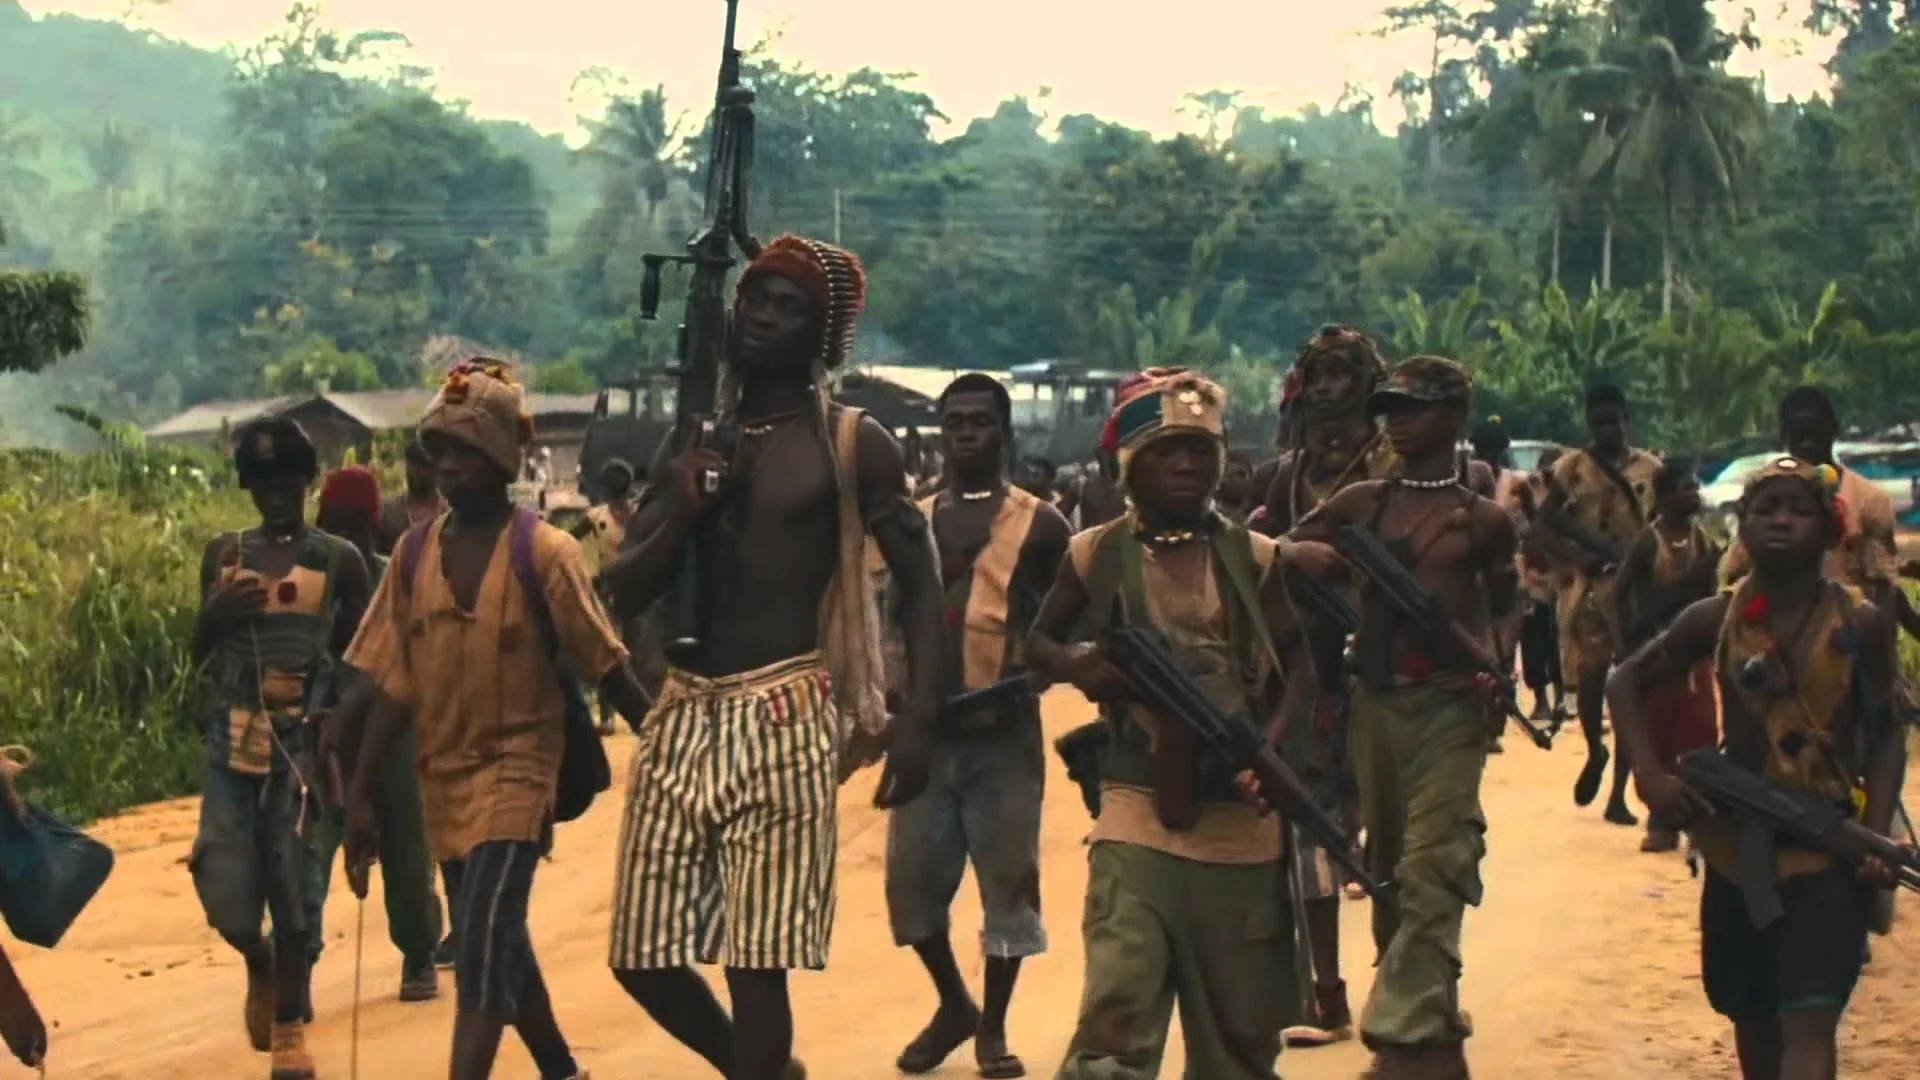 Top 5 Greatest War Films of the 2010s - Beasts of No Nation